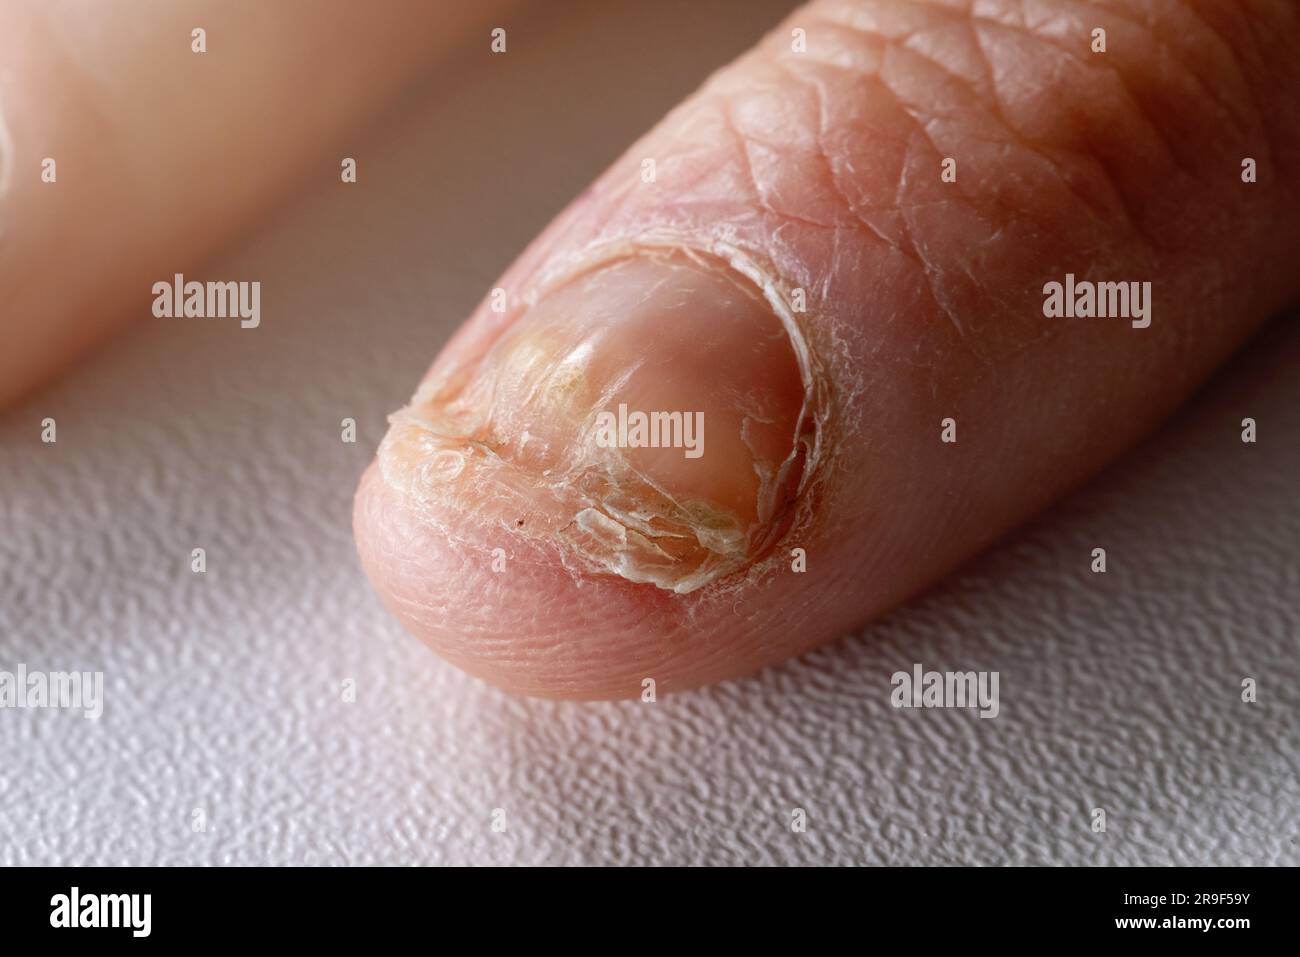 What Is Fungal Nail , How to Treat It?